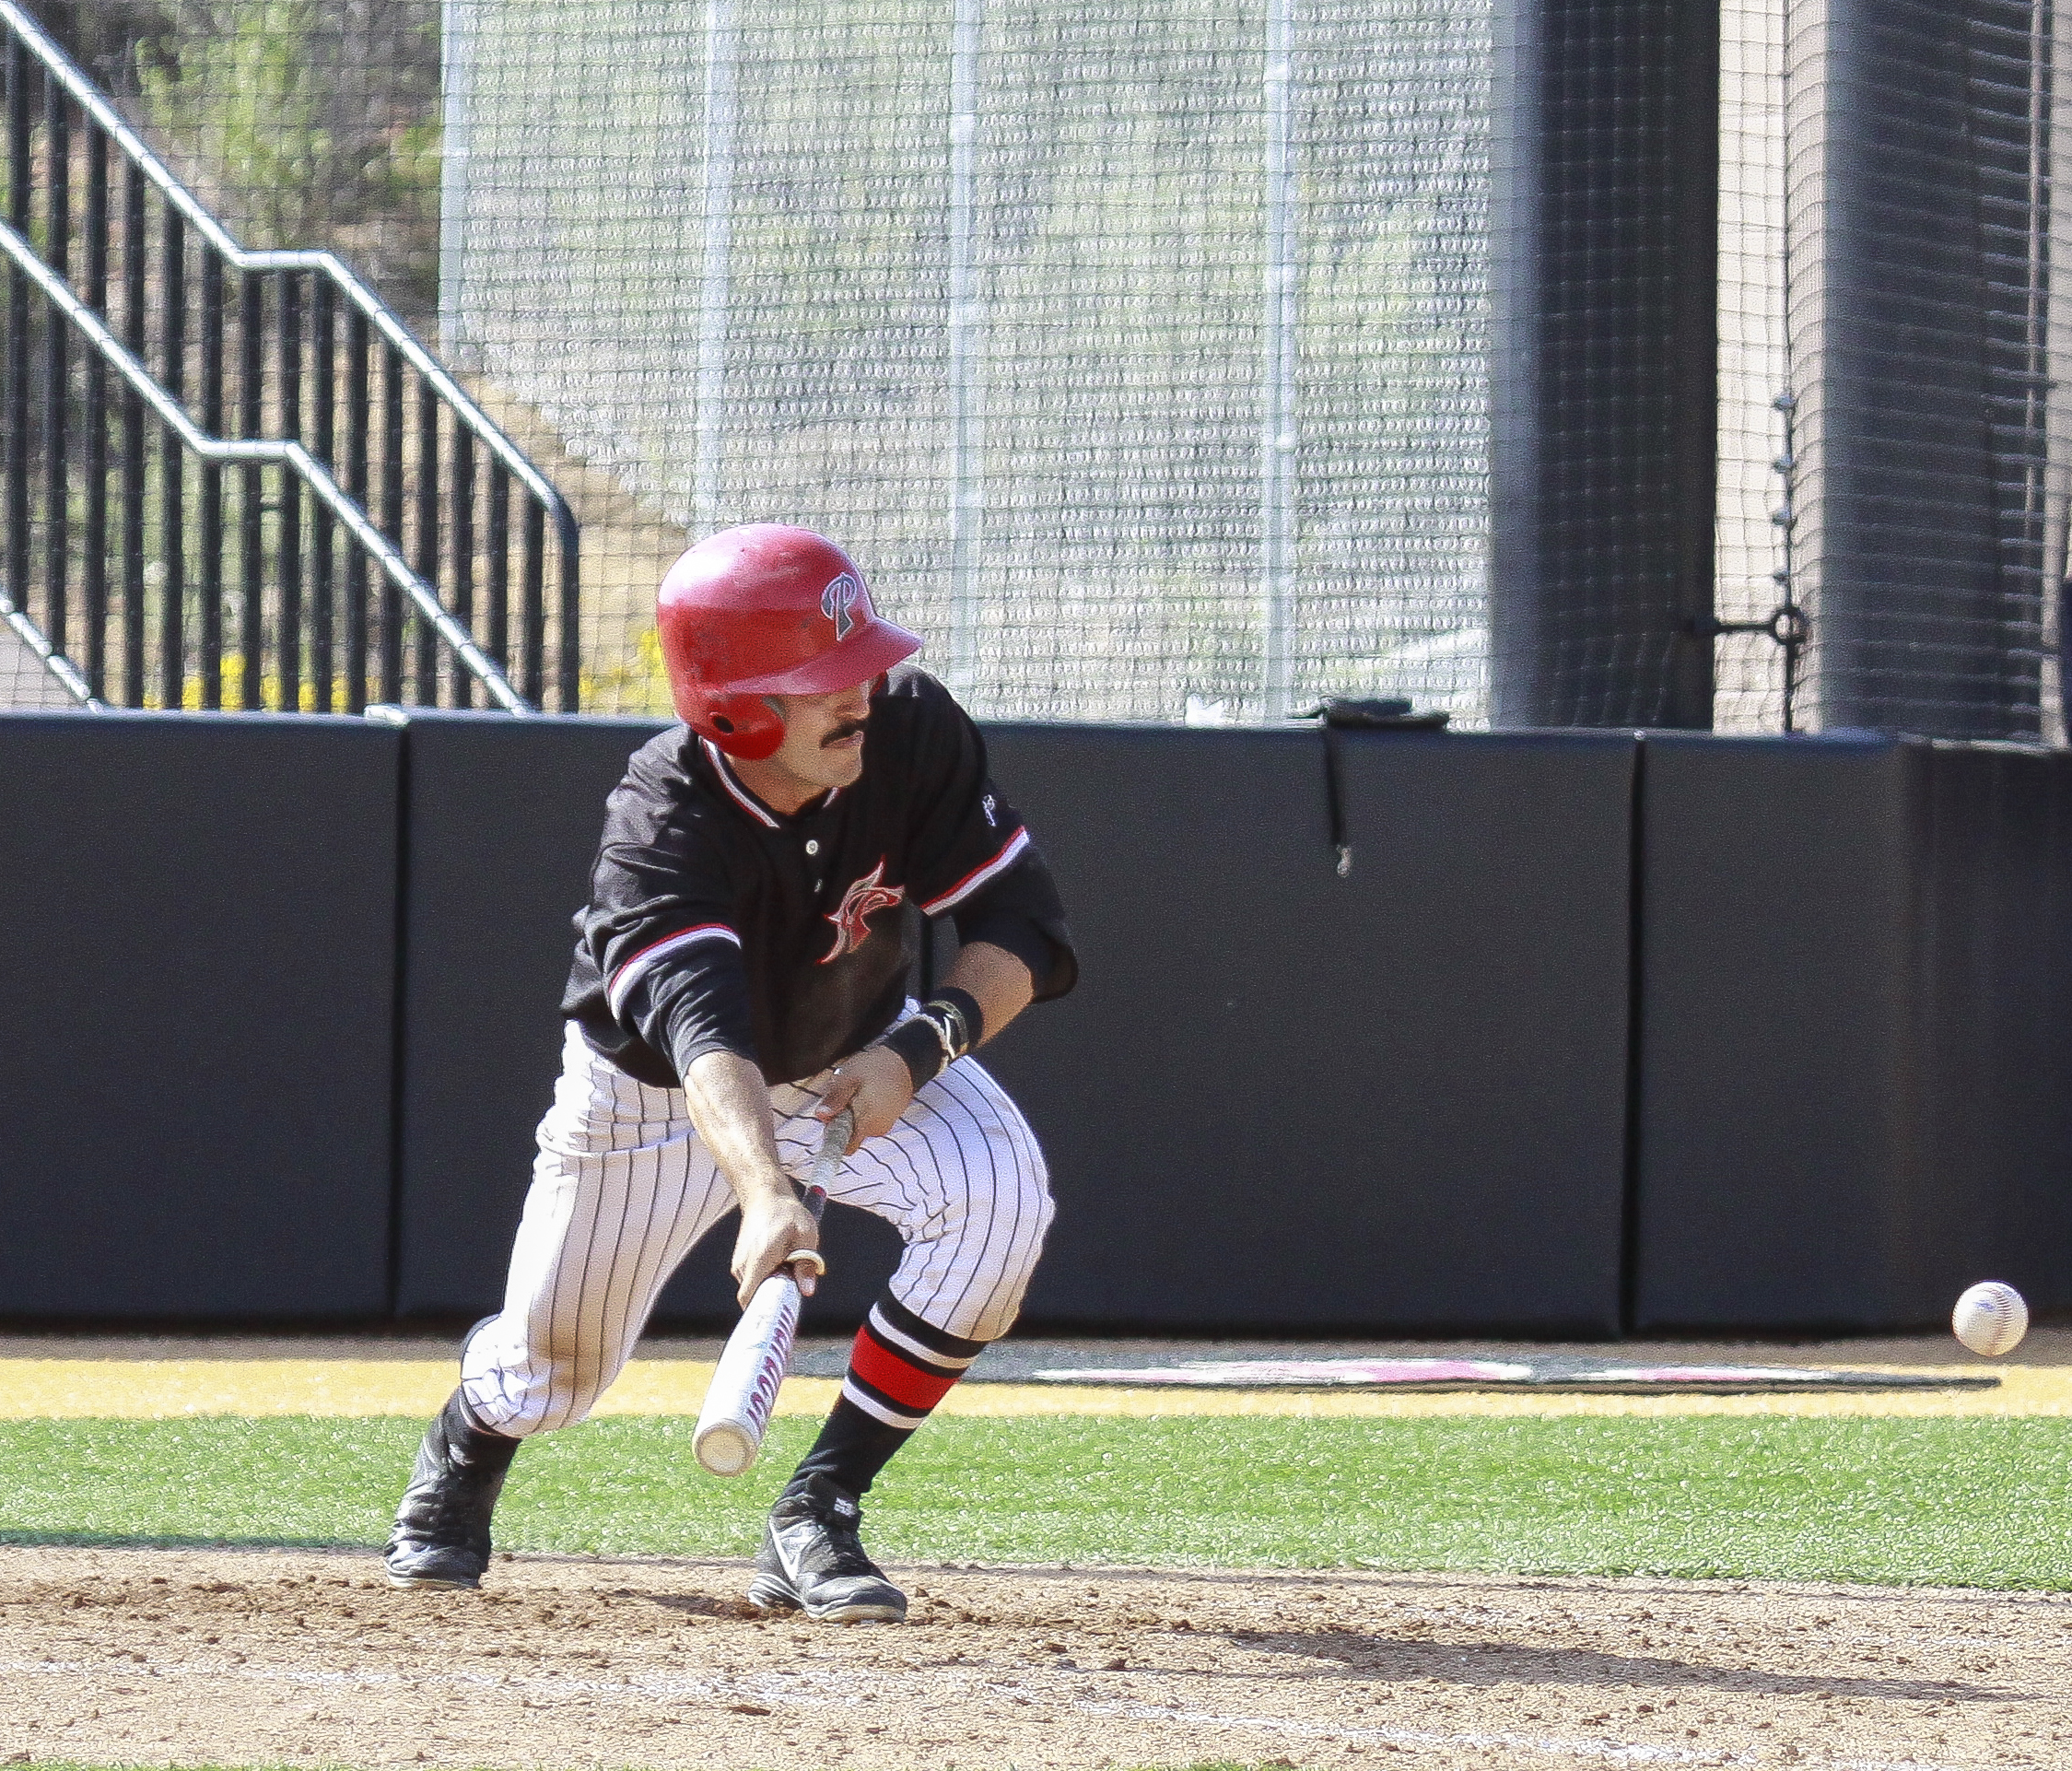 Palomar's Sam Casinelli lays down a bunt in the 5th inning against San Diego Mesa College at Palomar Ballpark on March 22. Casinelli safely reached 1st base ahead of the throw. Palomar scored 5 runs in the inning and won the game 16-11. Stephen Davis/The Telescope